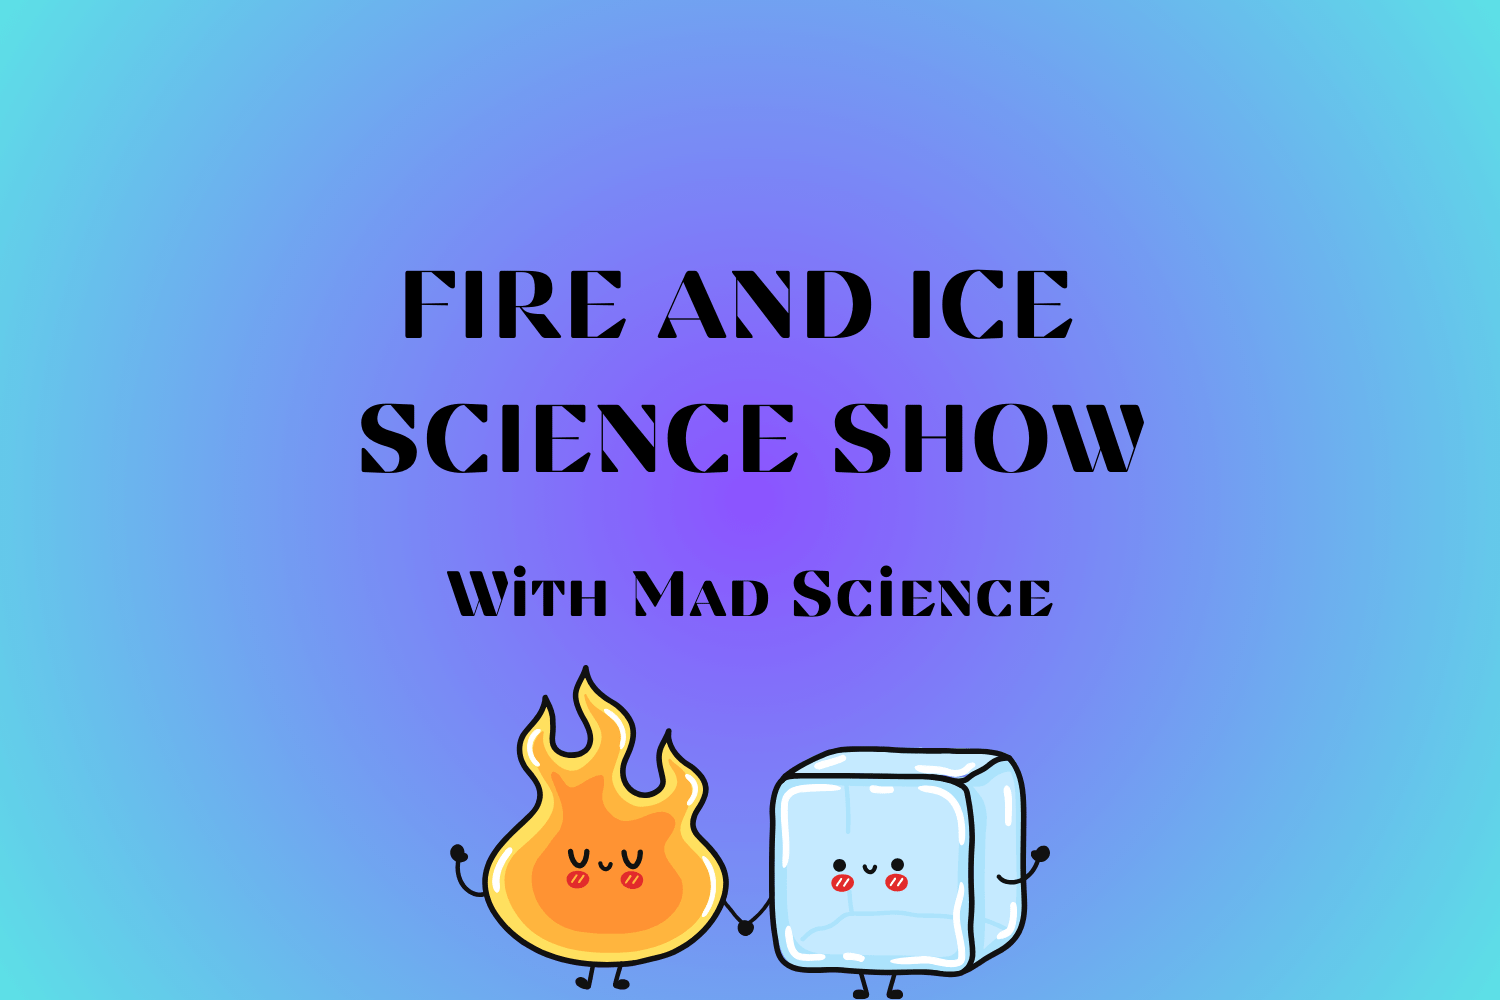 Image that says "FIRE AND ICE SCIENCE SHOW WITH MAD SCIENCE"